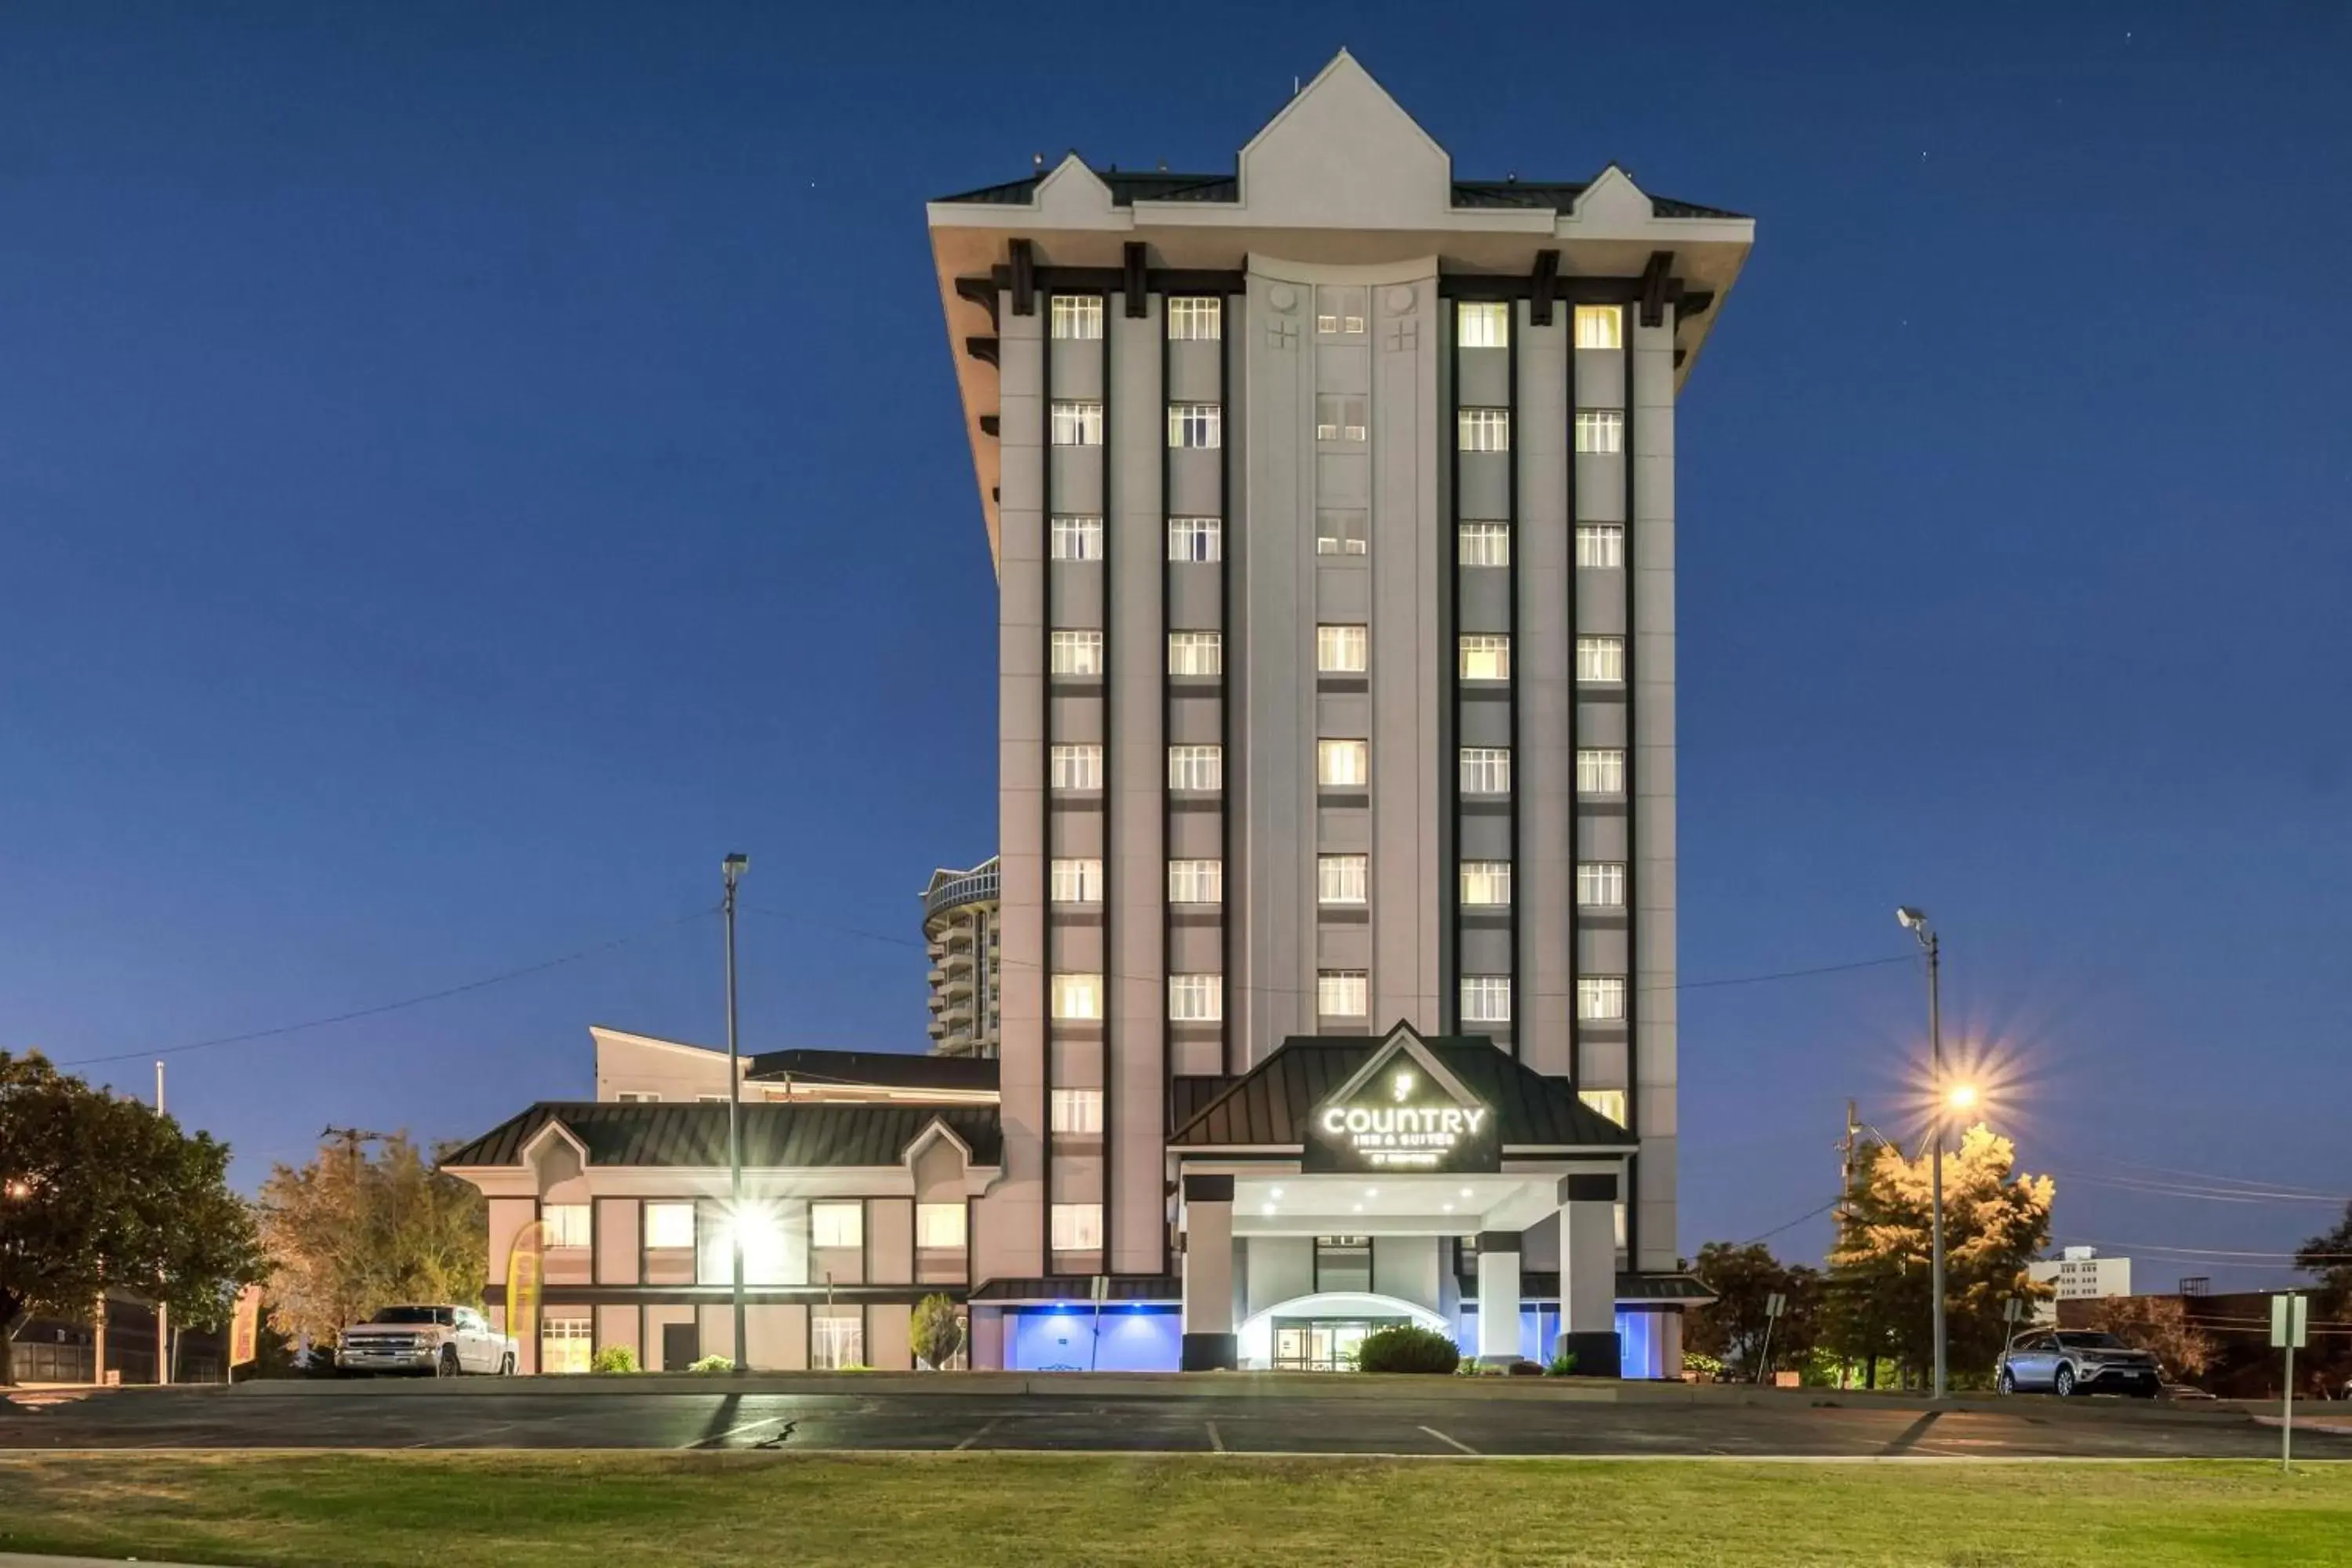 Property Building in Country Inn & Suites by Radisson, Oklahoma City at Northwest Expressway, OK